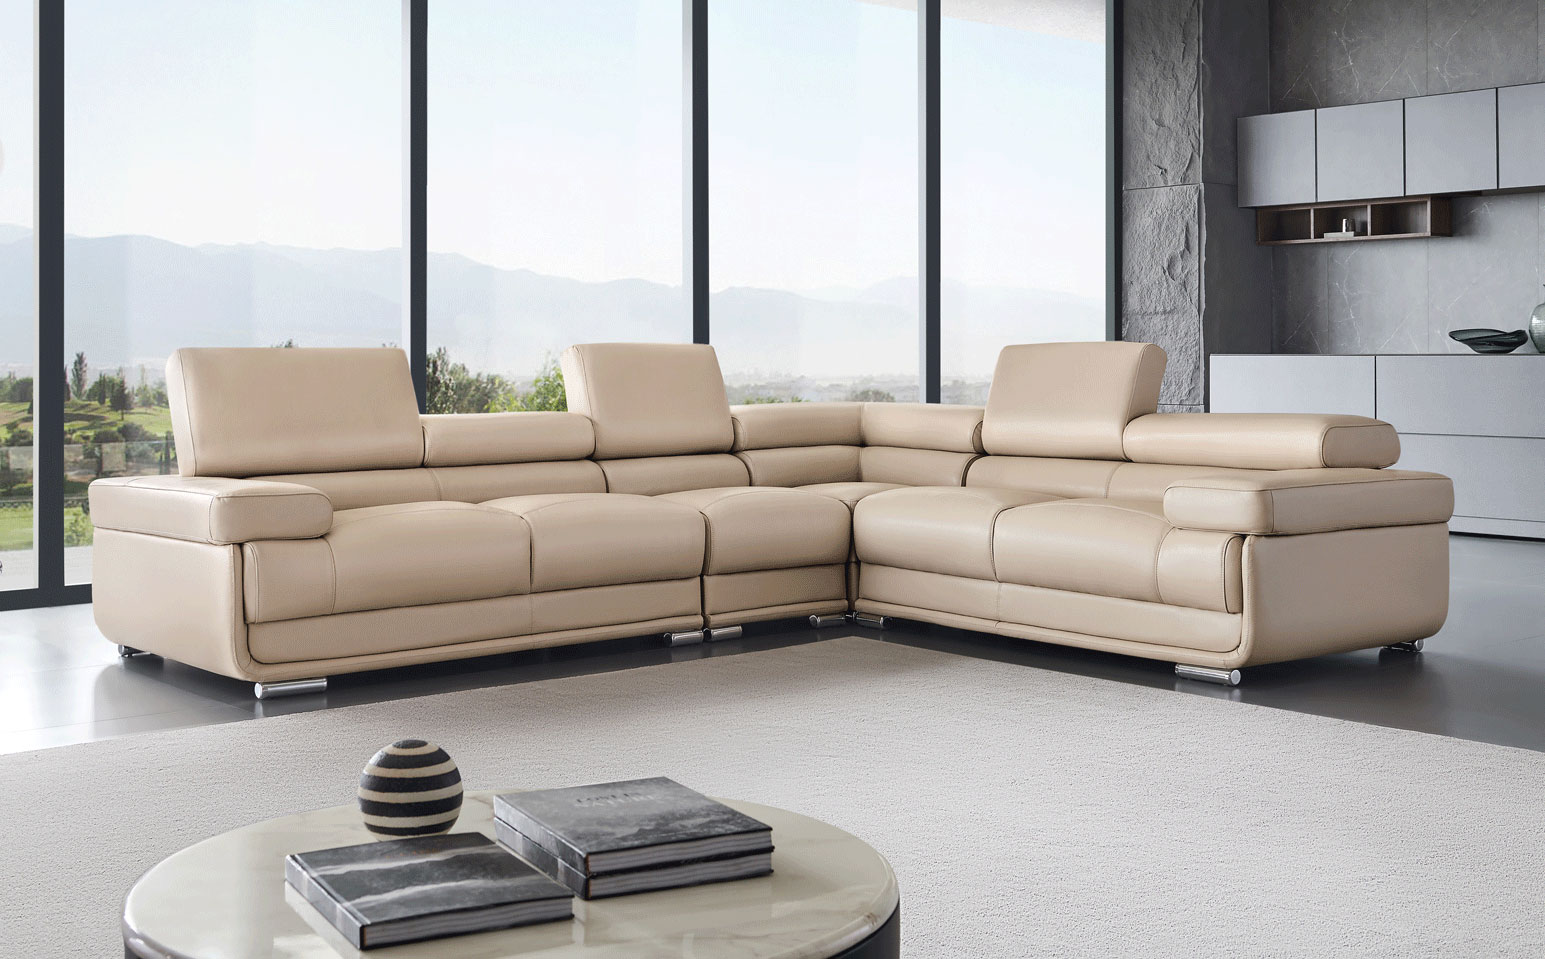 Living Room Furniture Reclining and Sliding Seats Sets 2119 Sectional Cream